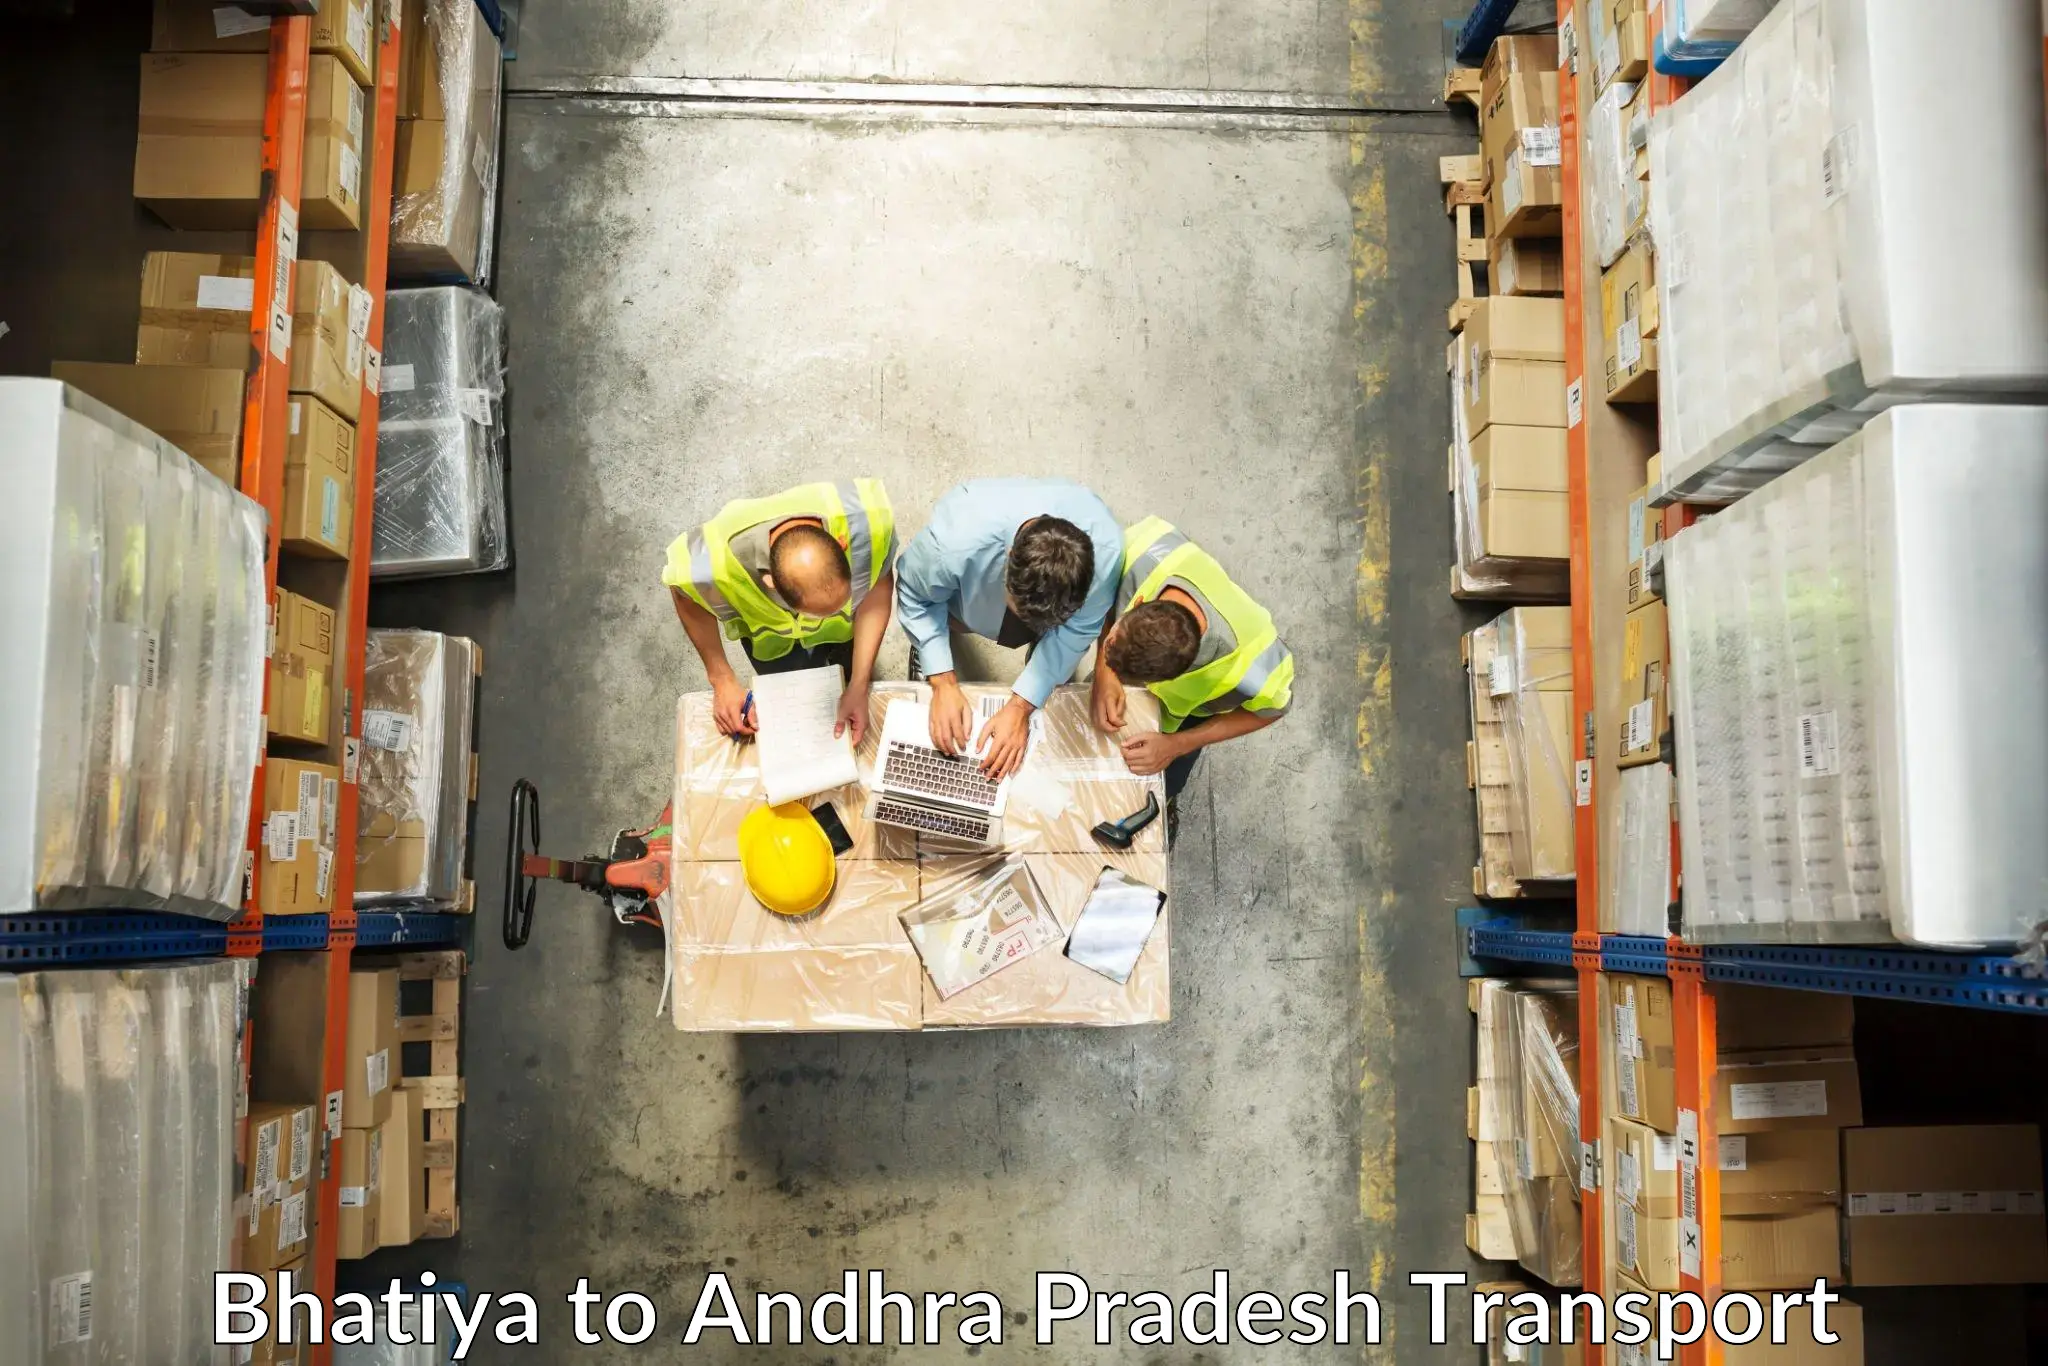 Air freight transport services in Bhatiya to Madanapalle